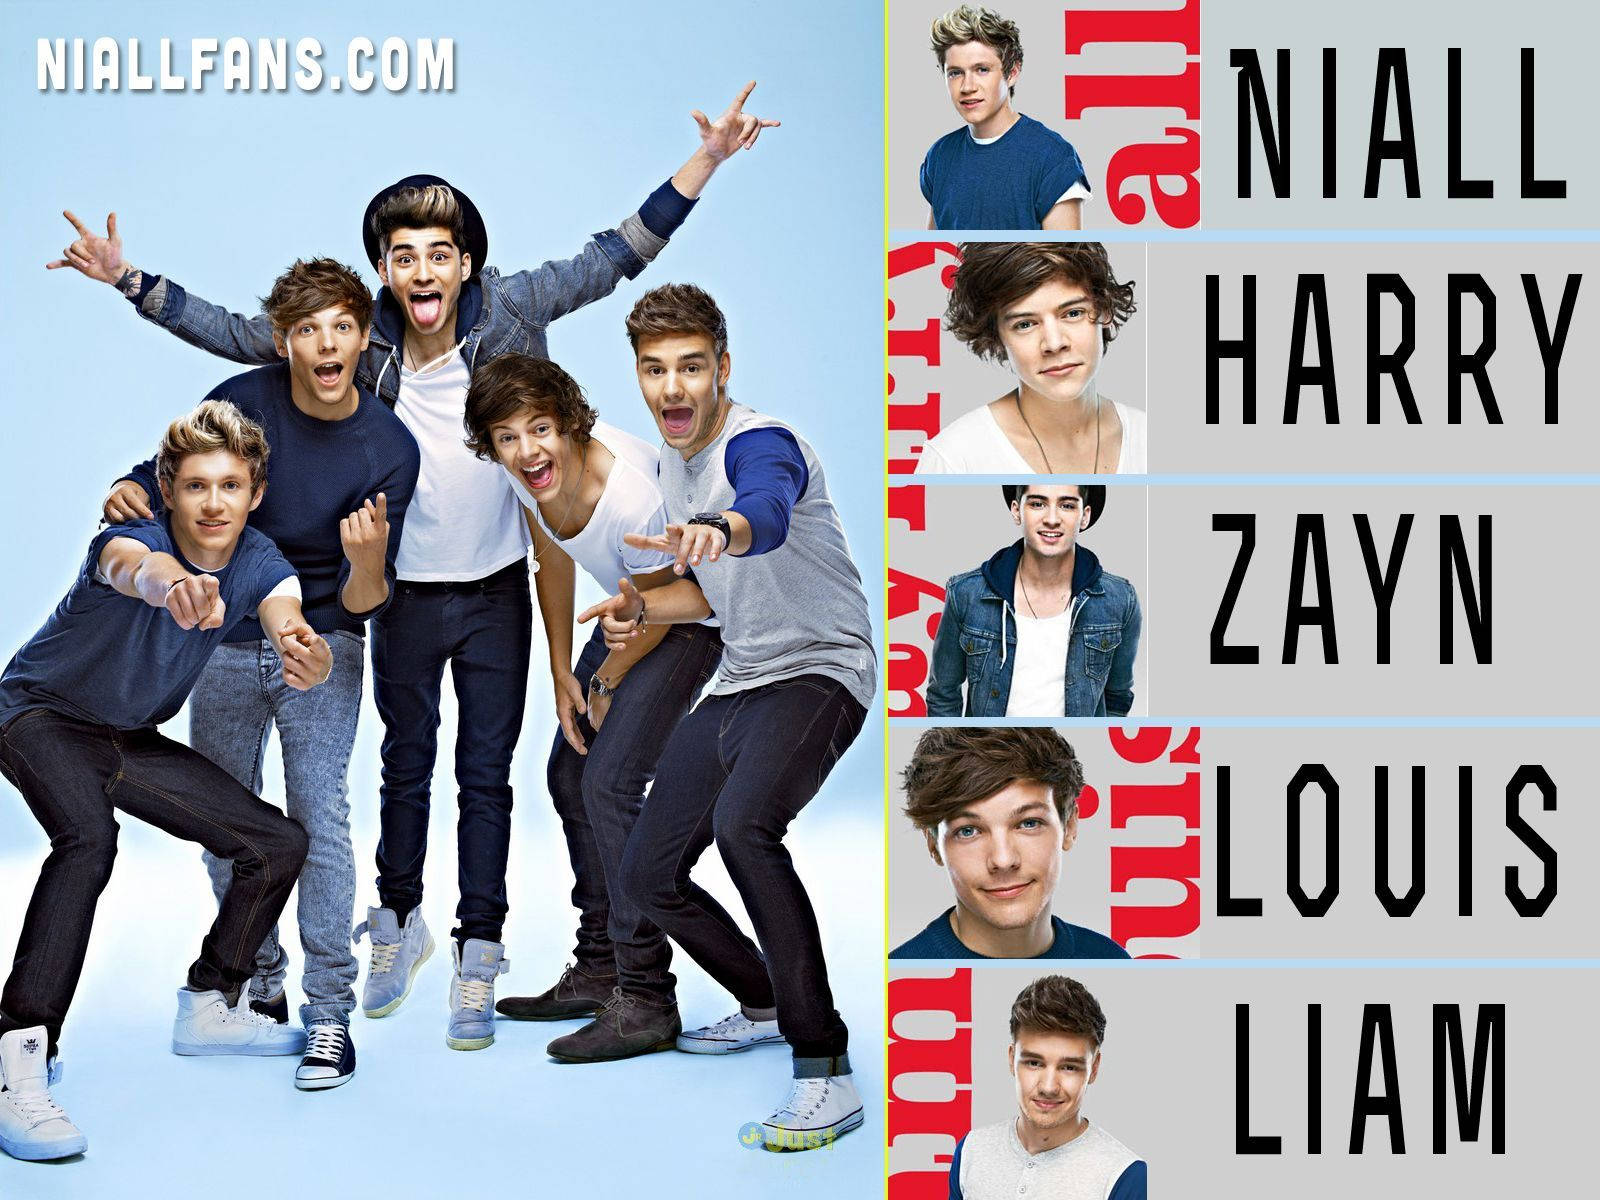 All-star 5: One Direction’s Harry, Zayn, Louis, Niall And Liam Background